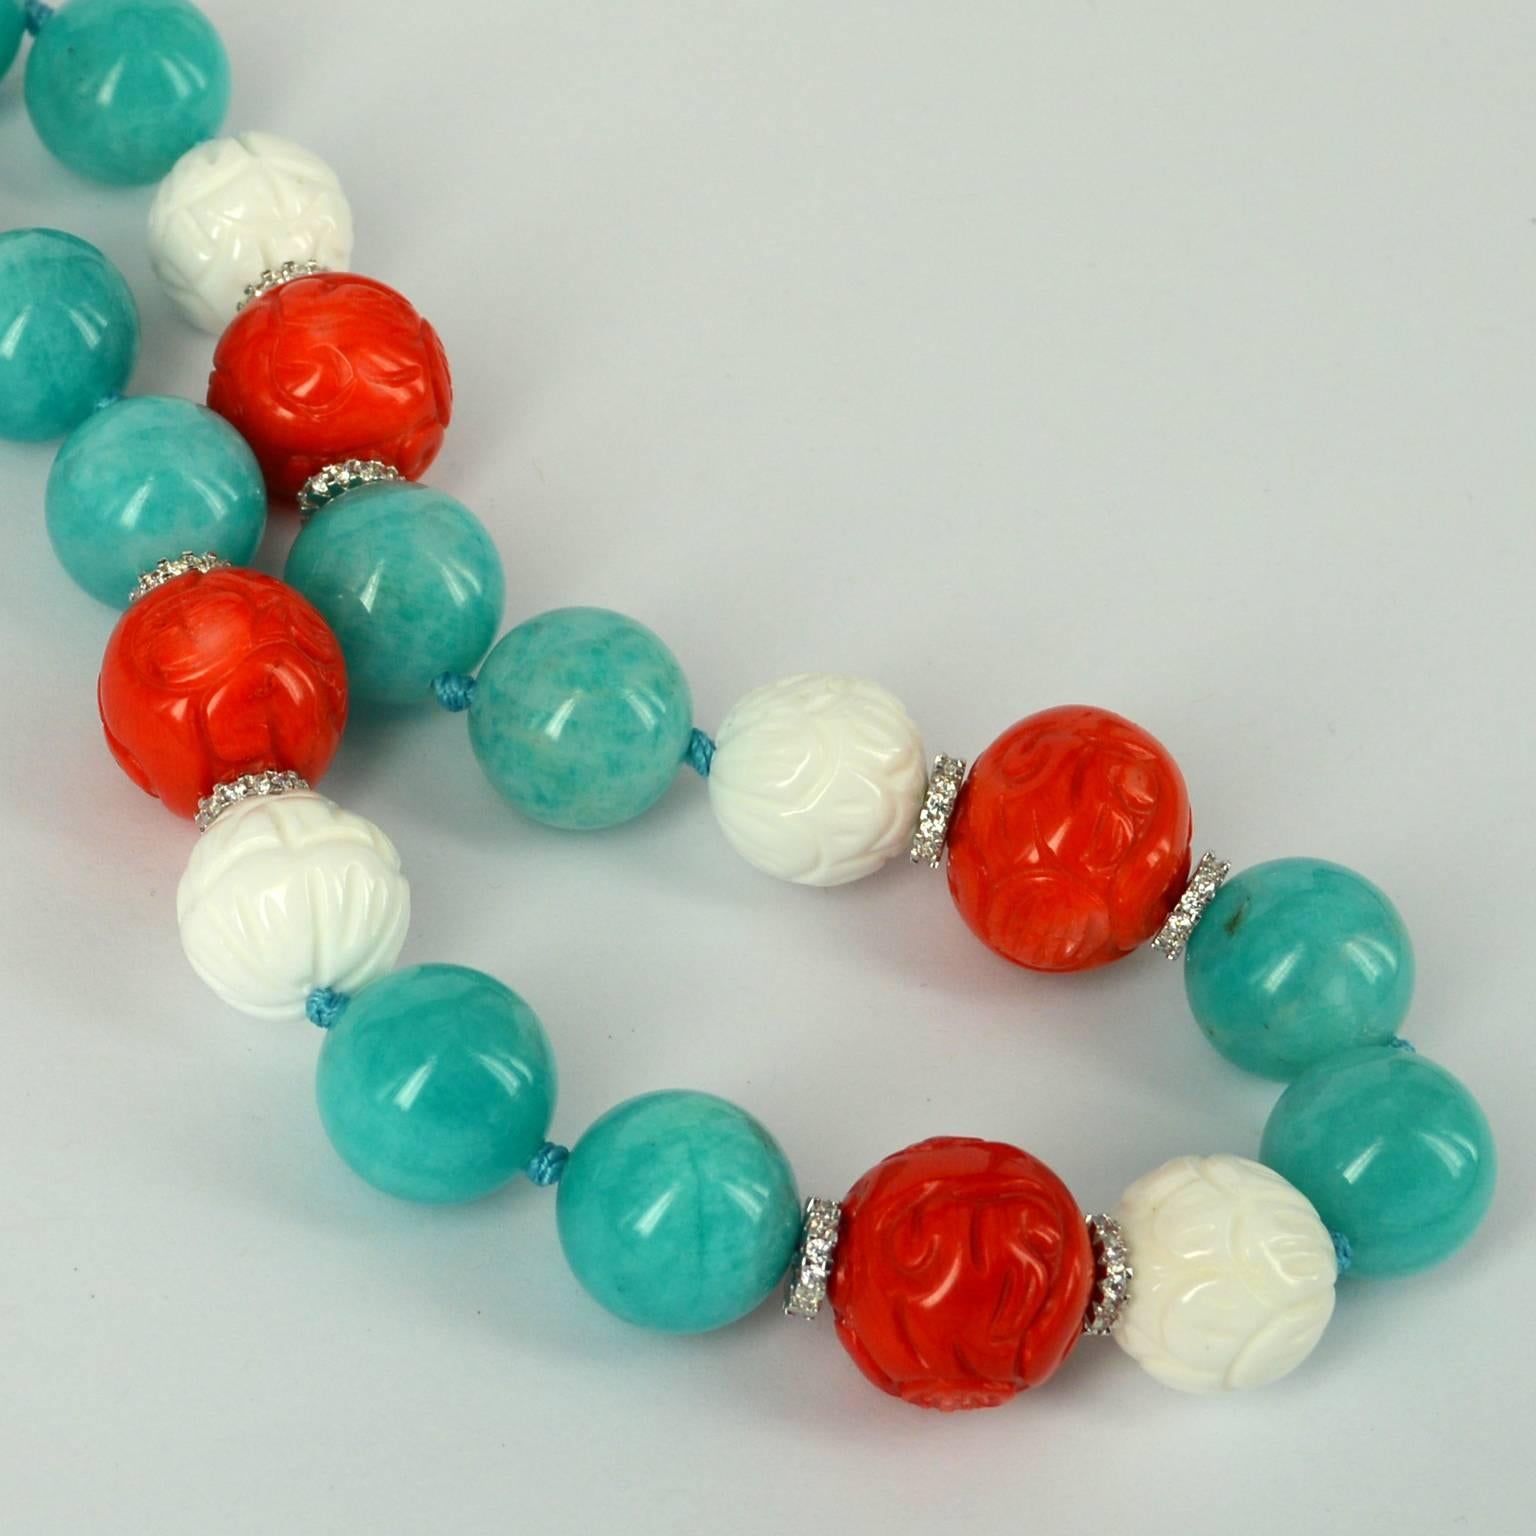 Stunning  high quality 16mm AA+ Peruvian Amazonite beads make this necklace, conbined with 17mm Carved Orange Sea Bamboo beads, which have have a Rhodium plate CZ spacer either side, and 16mm Carved white shell beads. Clasp is 16mm Sterling